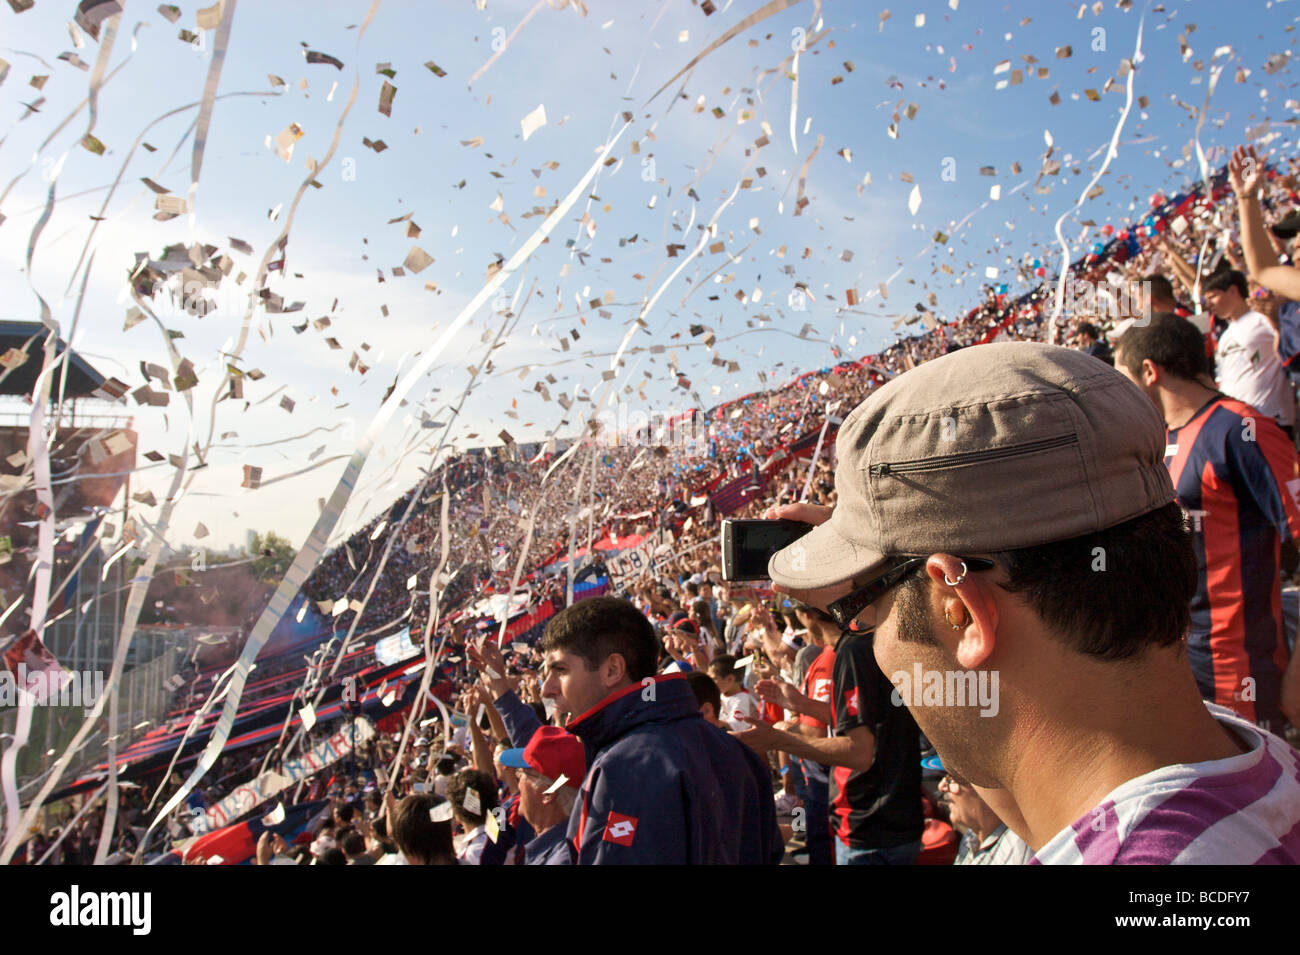 Fans of football team San Lorenzo celebrate as their players take to the pitch for a match against Racing. Stock Photo